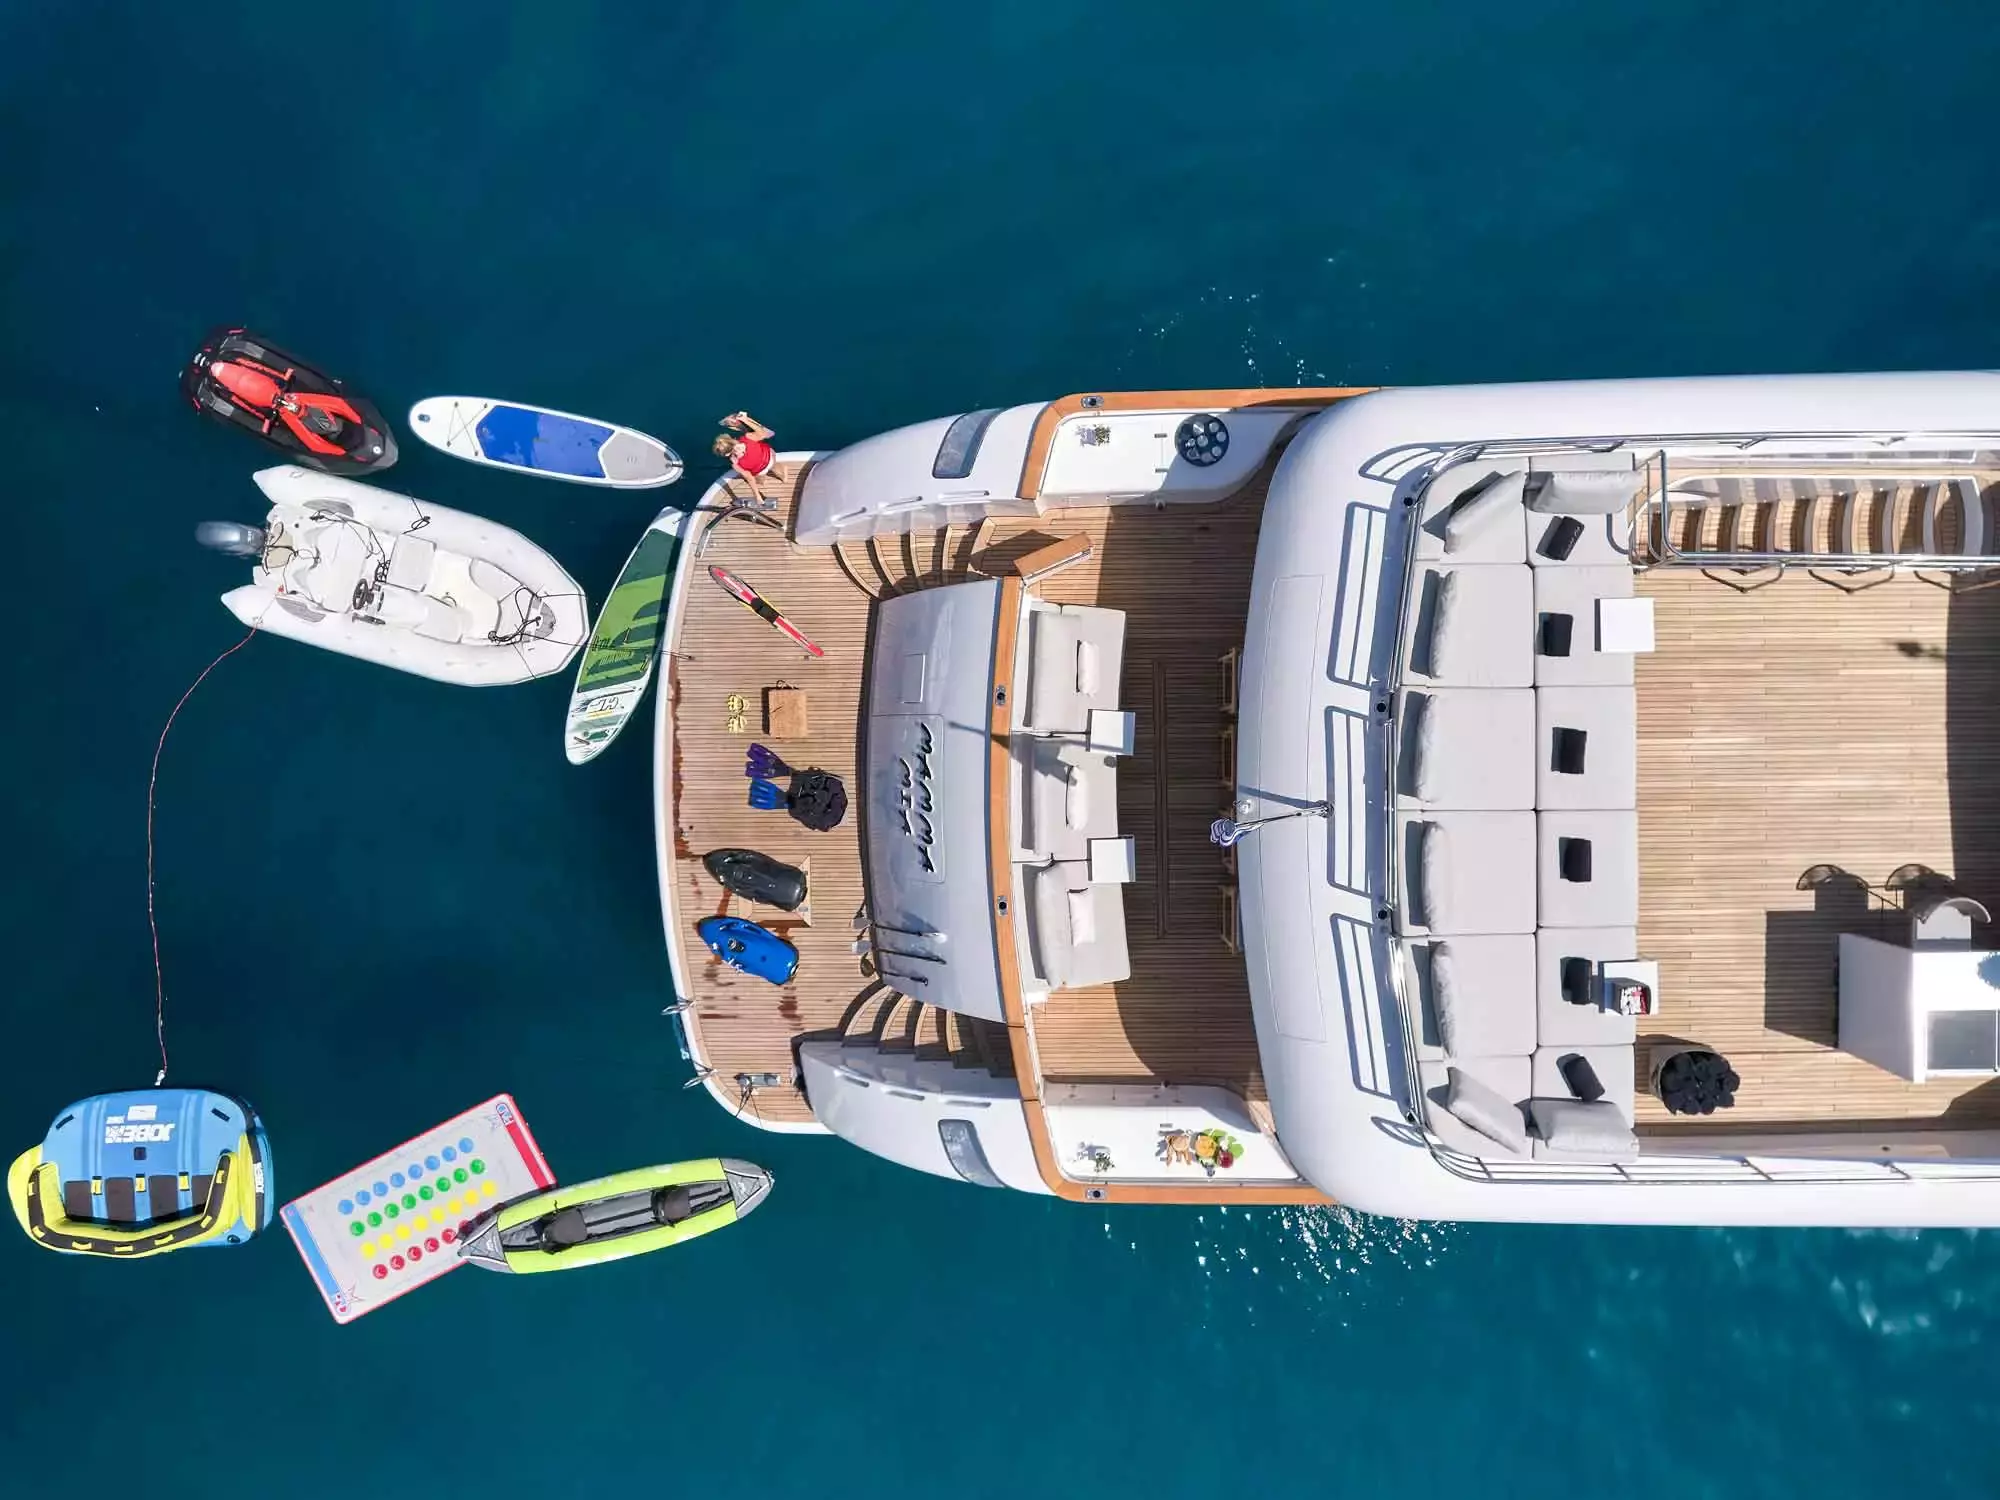 Mamma Mia by Maiora - Special Offer for a private Superyacht Charter in Corfu with a crew